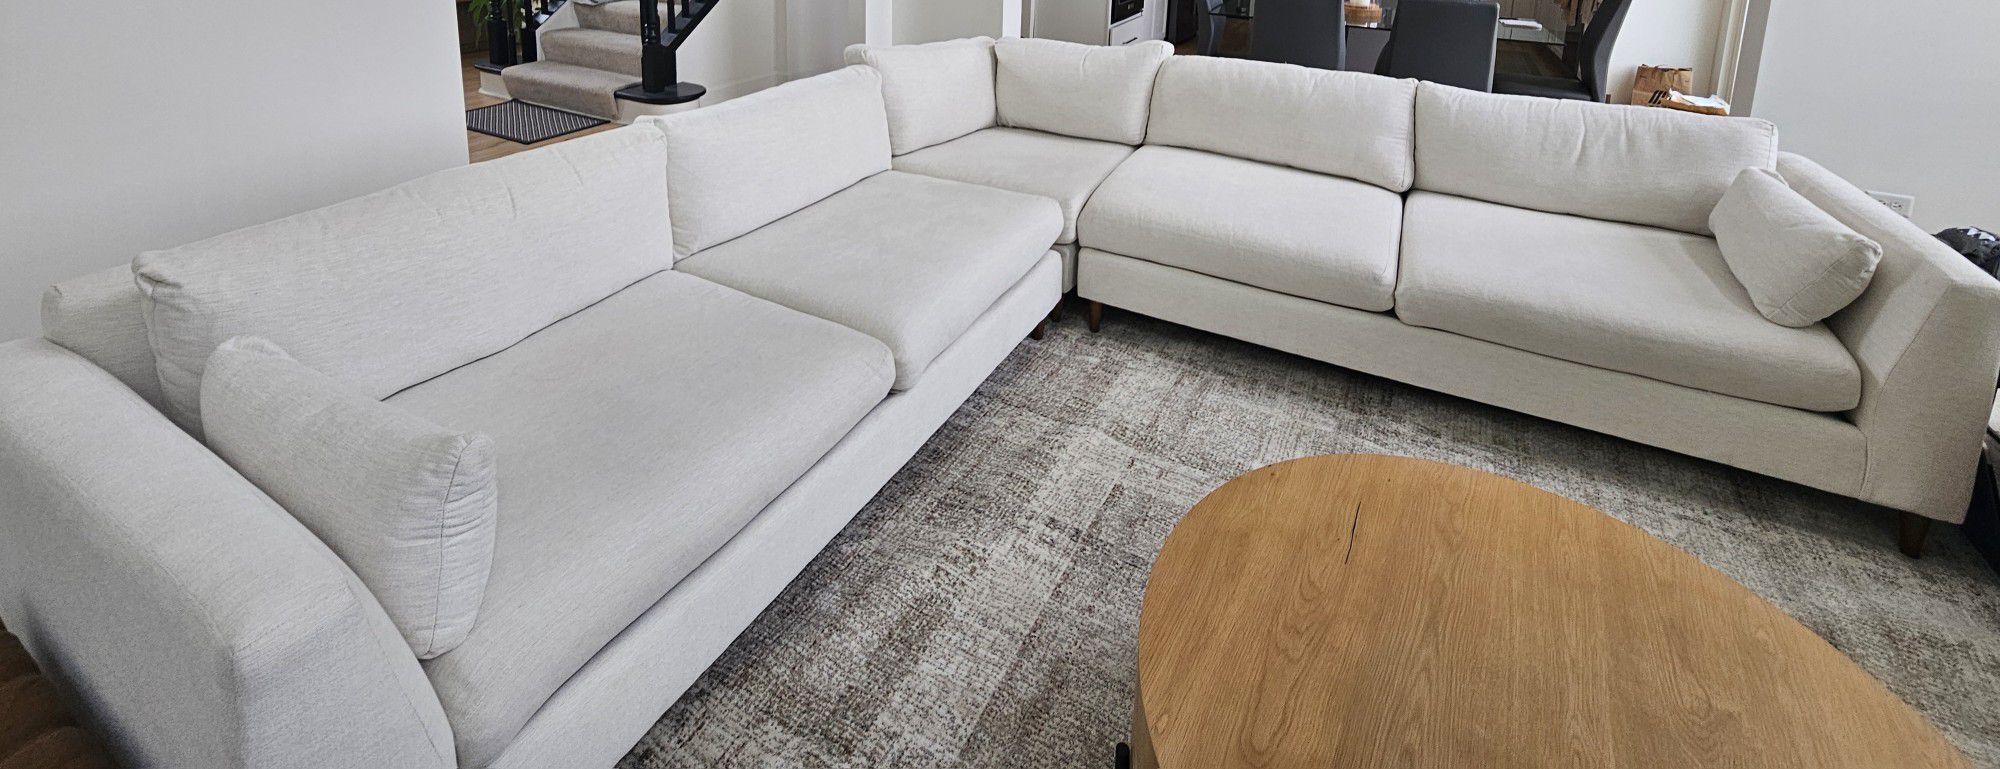 Crate and barrel Sectional SOFA